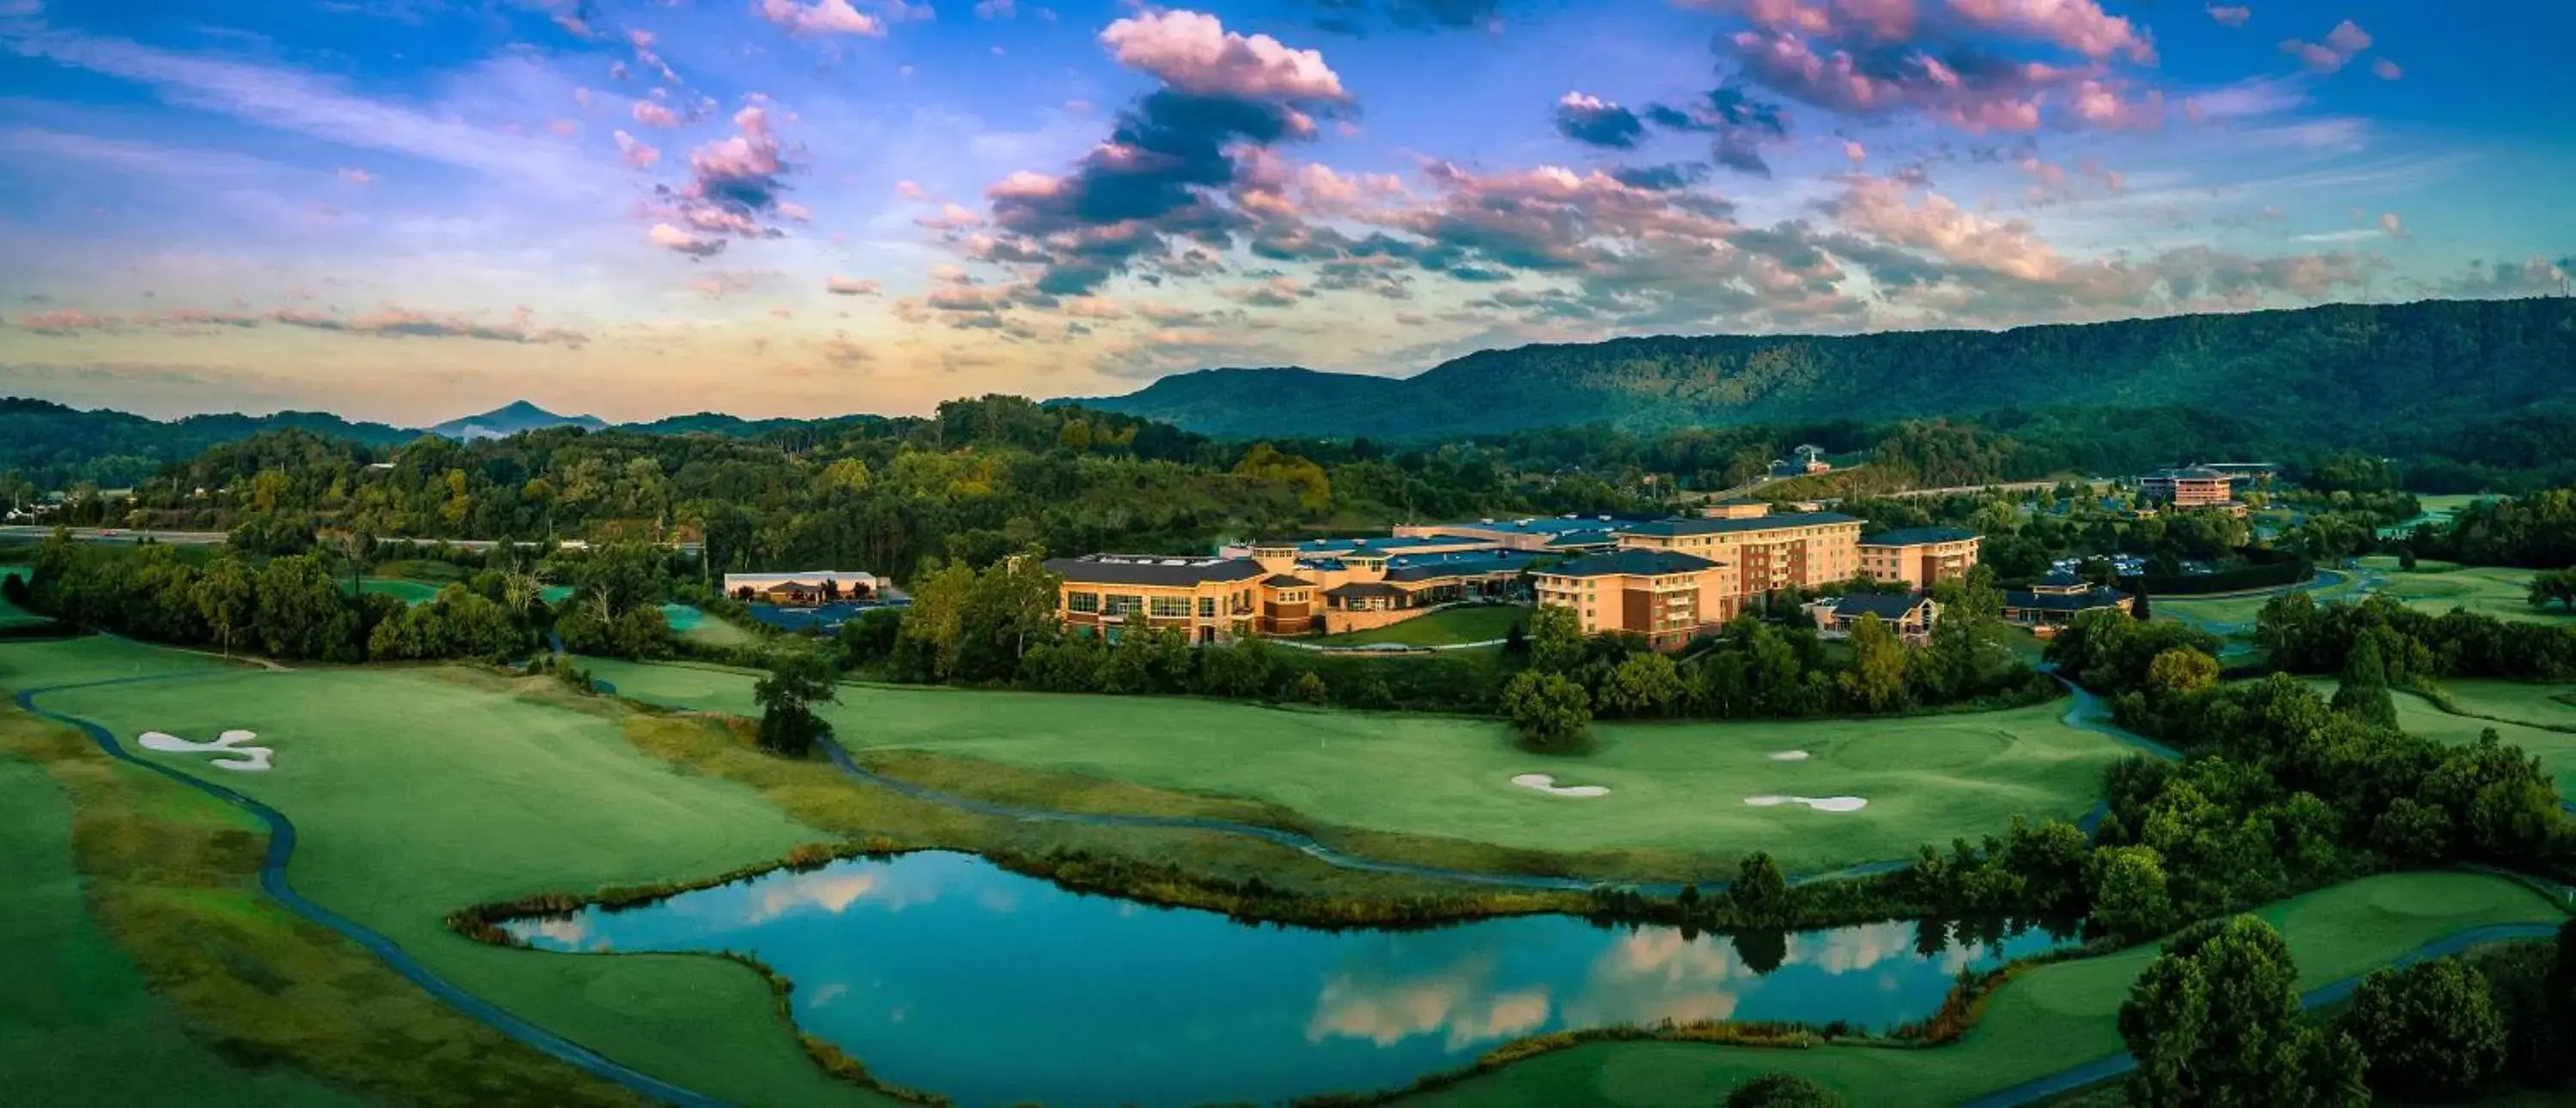 Bird's-eye View in MeadowView Marriott Conference Resort and Convention Center